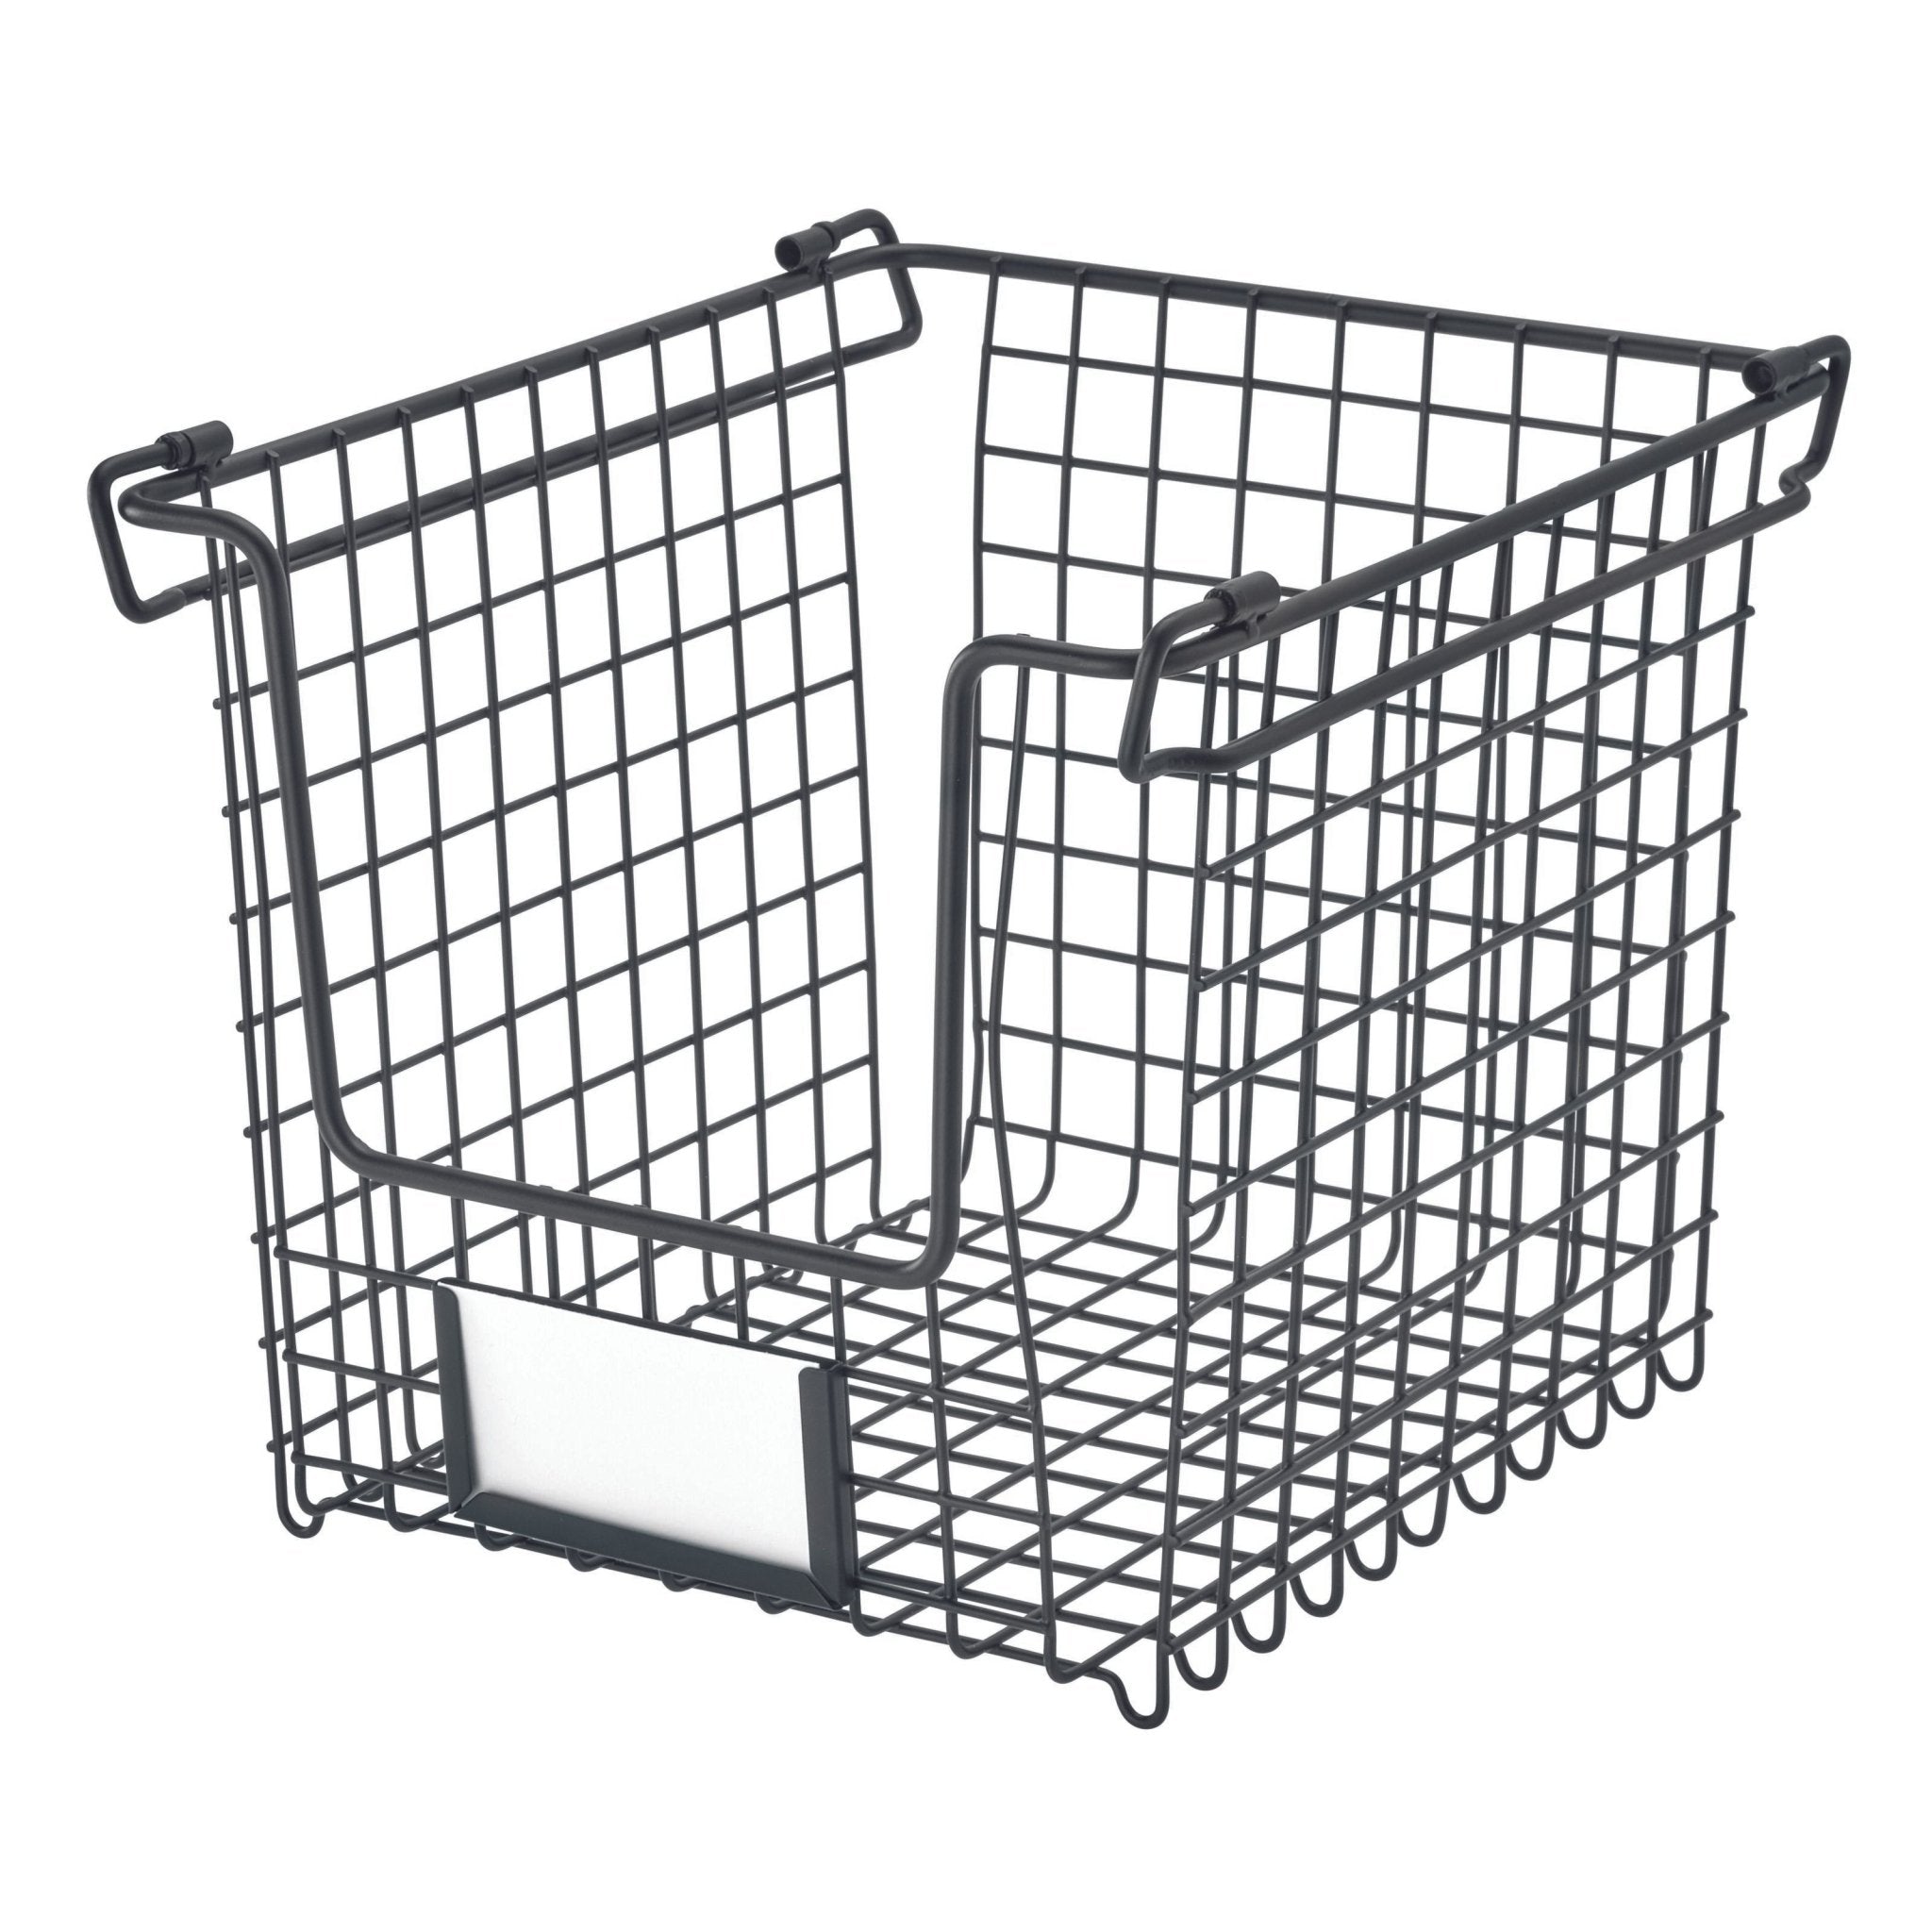 idesign Classico - storage basket metal - various size - BINS AND BOXES